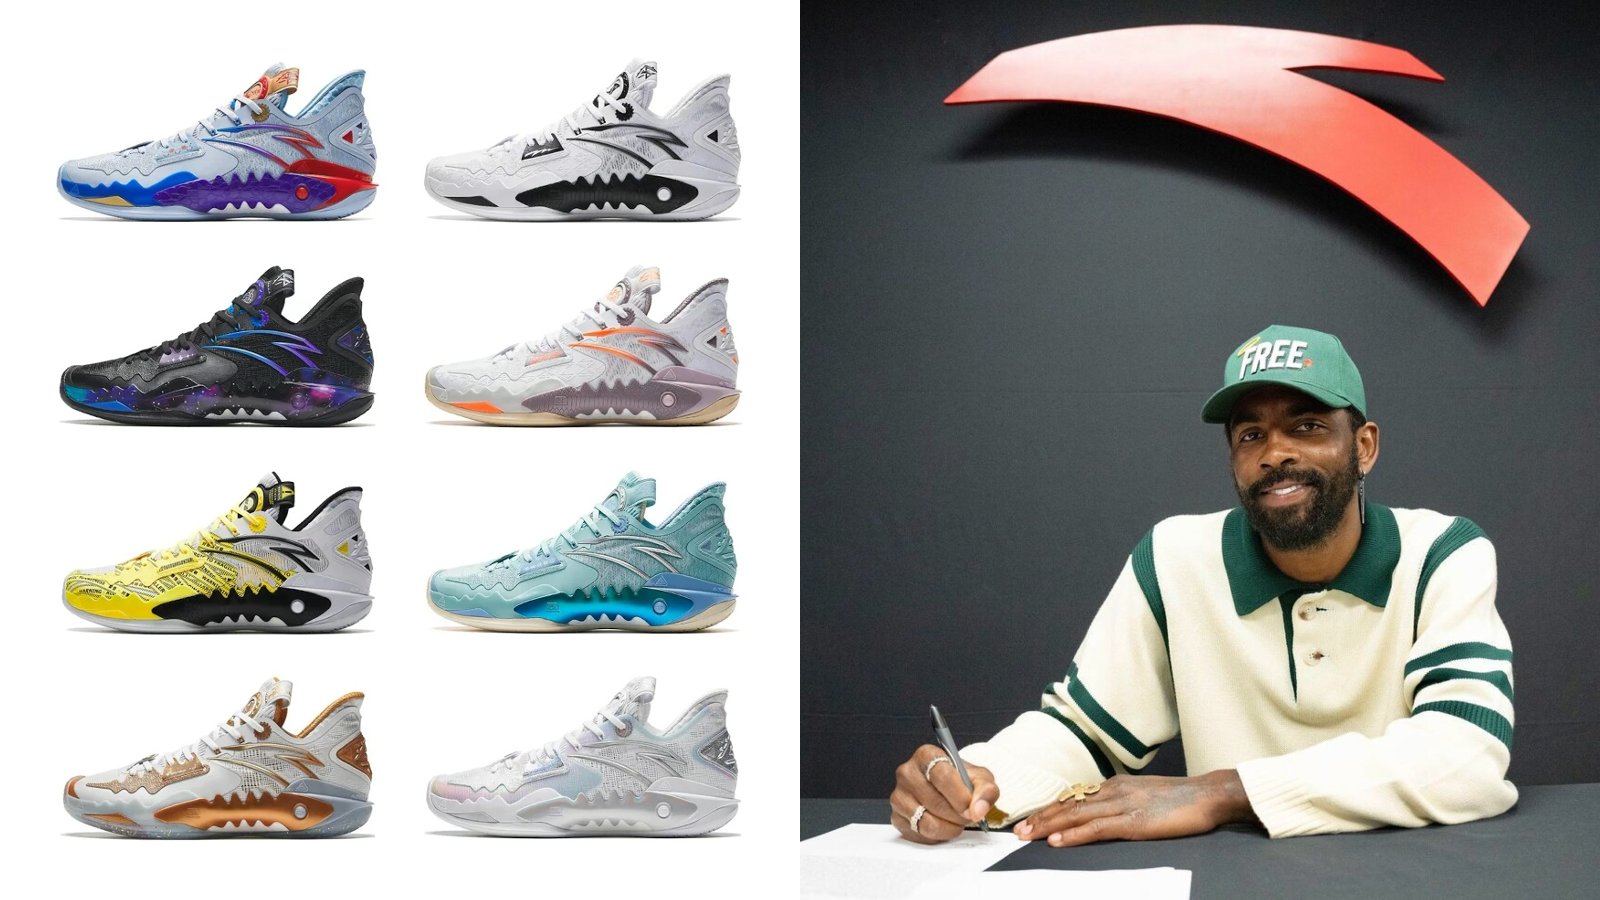 8 Colorways All New Anta Shock Wave 5 Released, To Be Worn By Kyrie Irving 